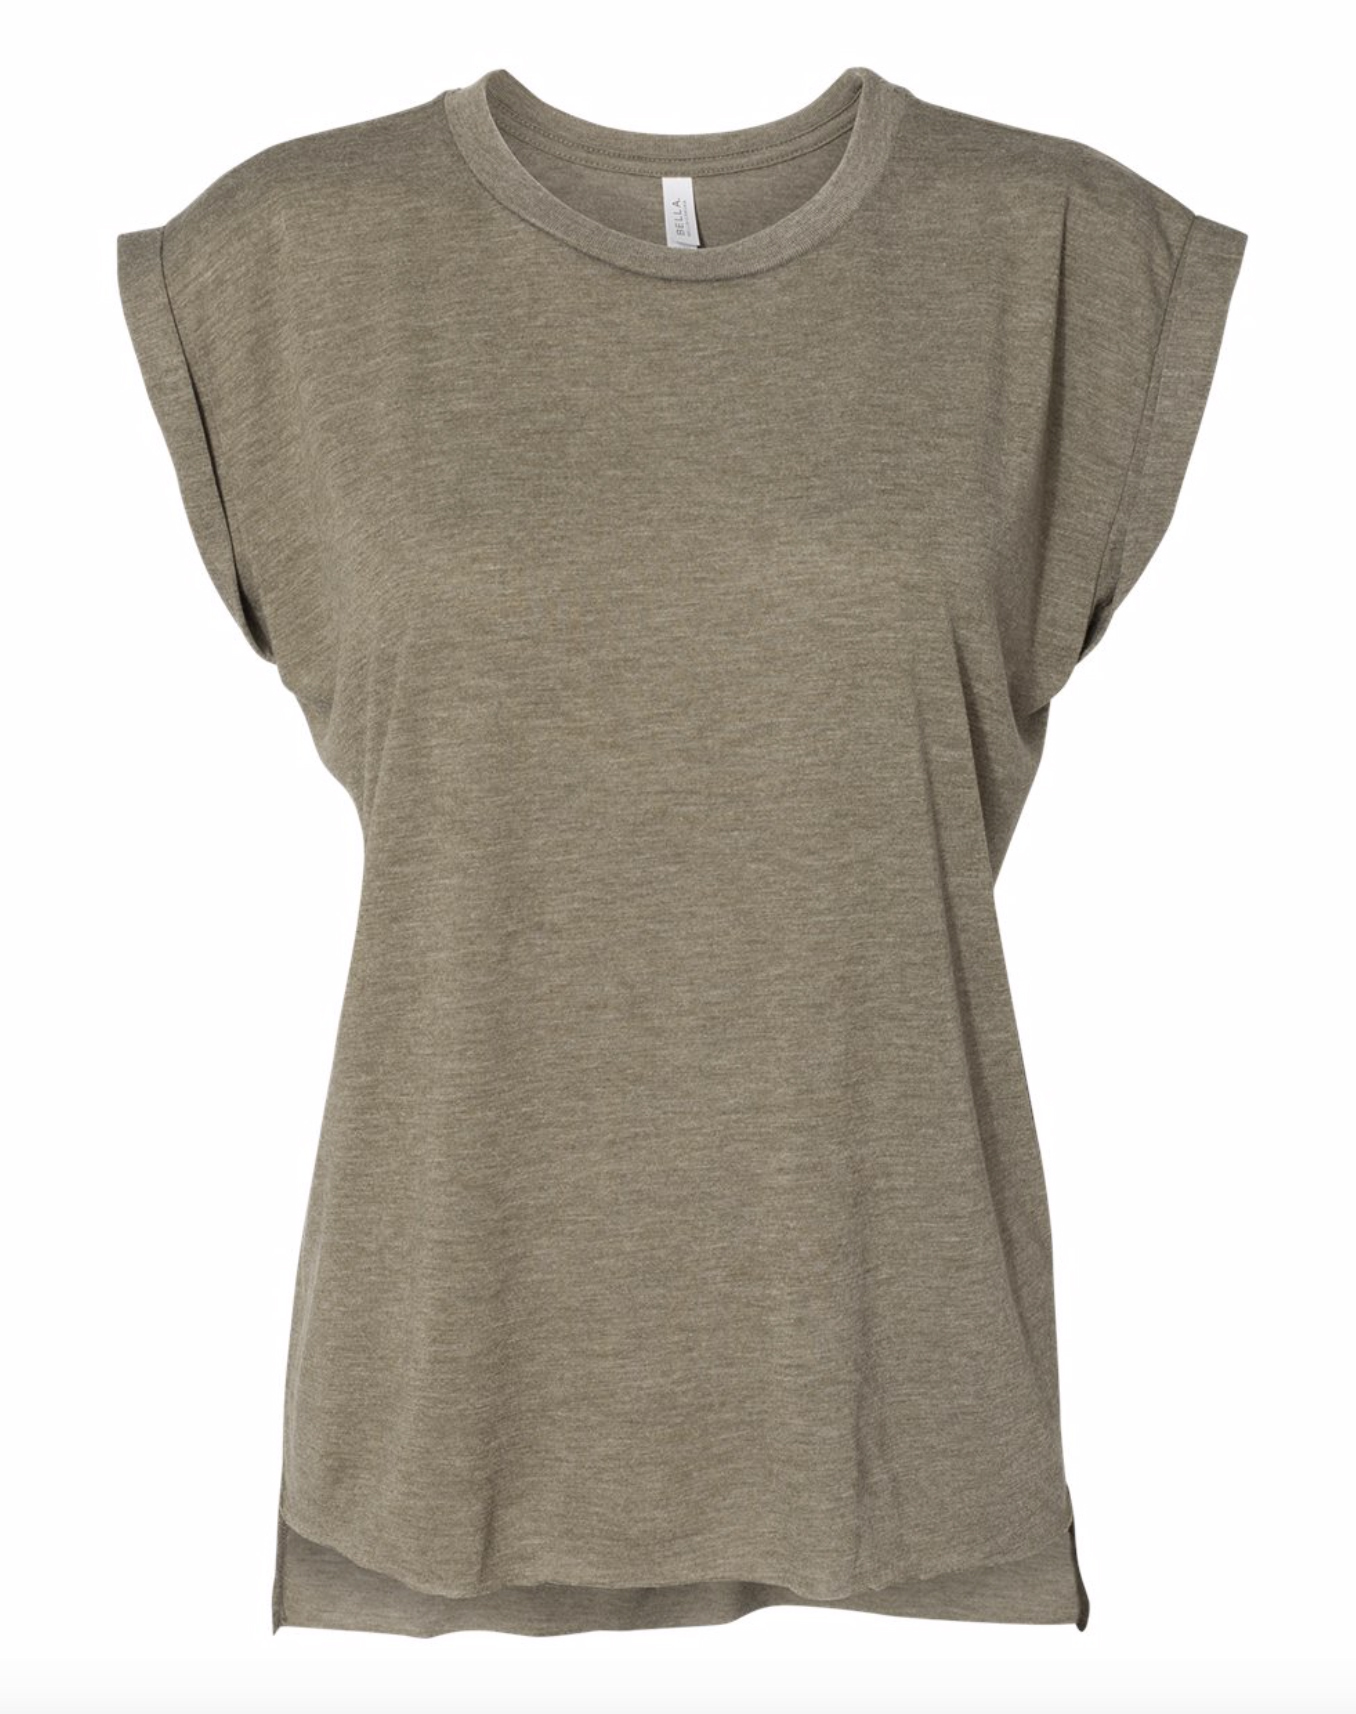 Ladies Flowy Sleeveless Tee w/rolled cuffs in OLIVE